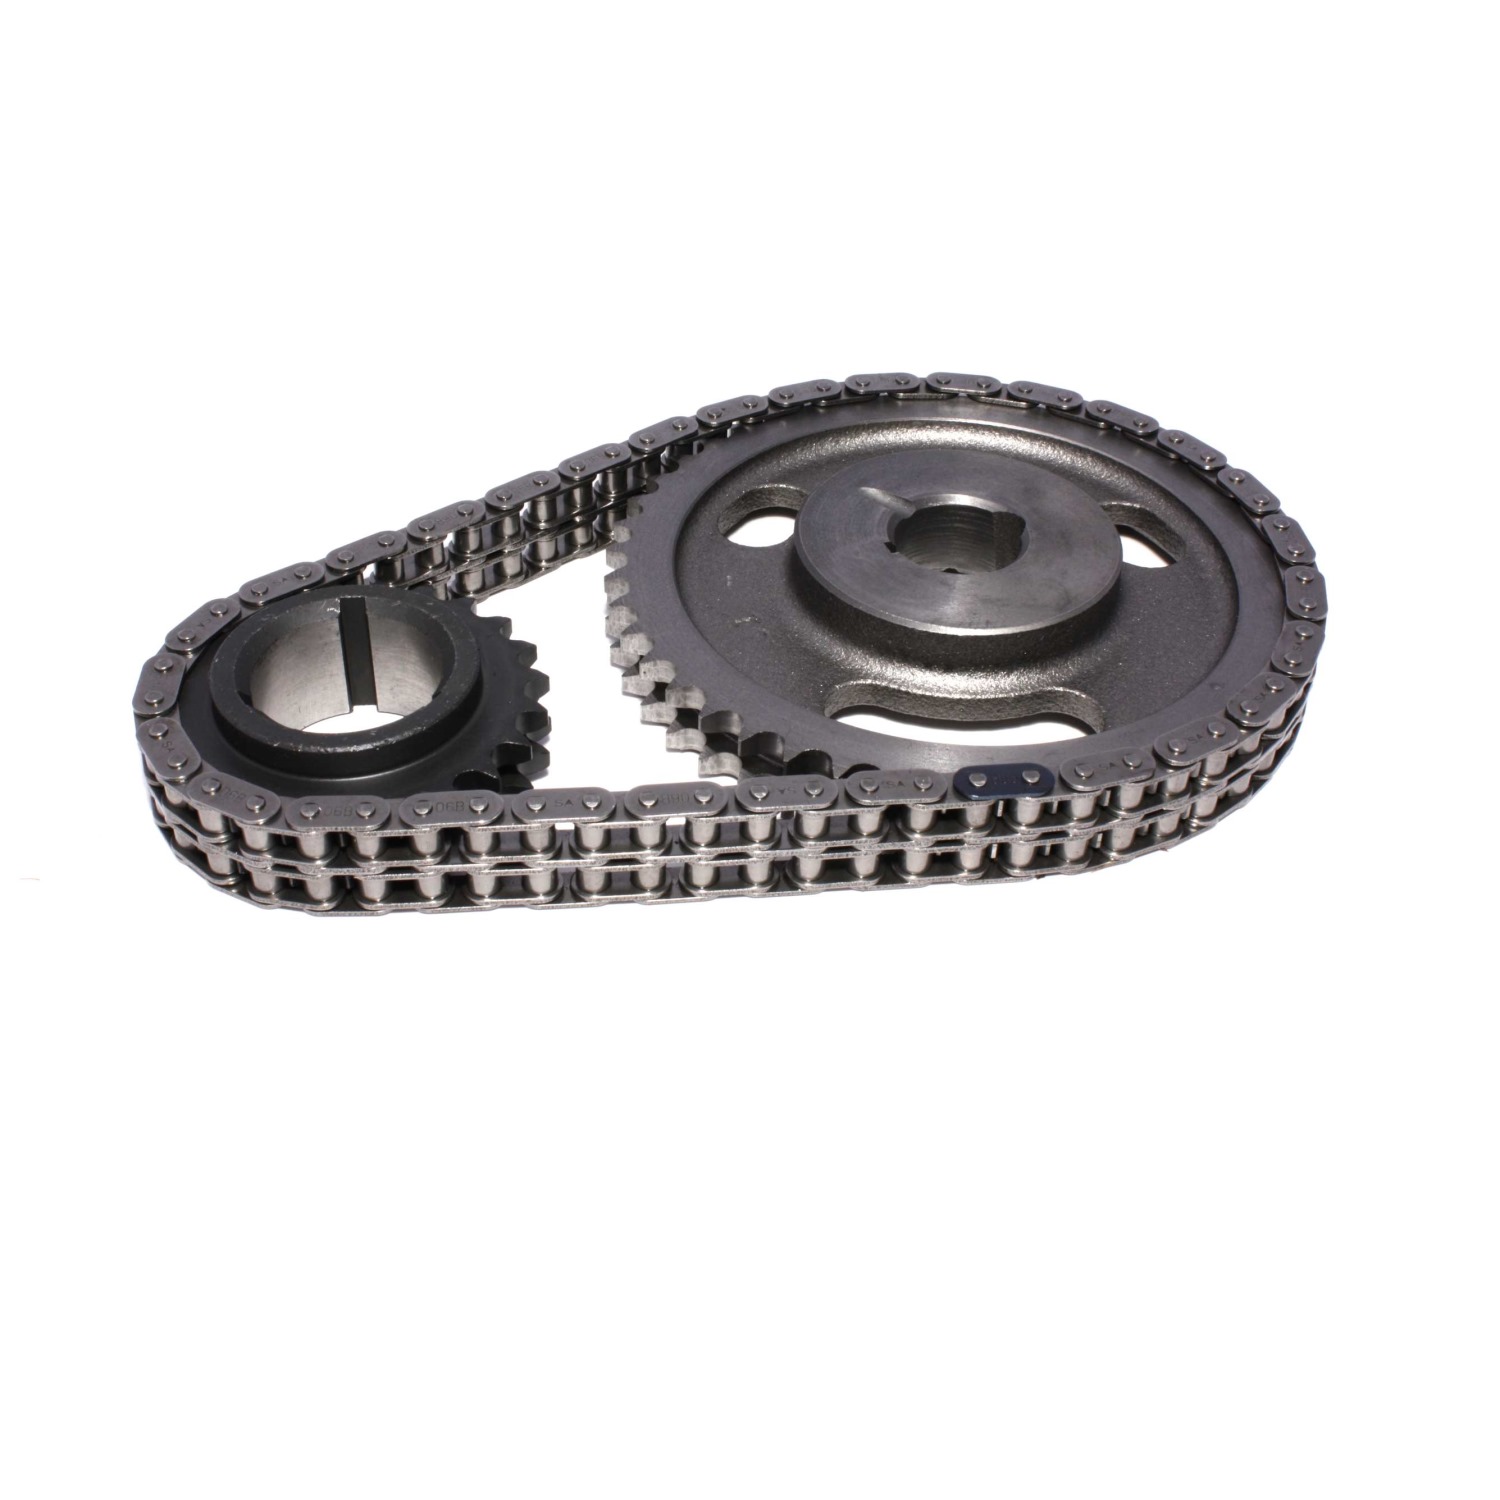 Replacement Timing Chain for 3118 Hi-Tech Timing Set. - 3118